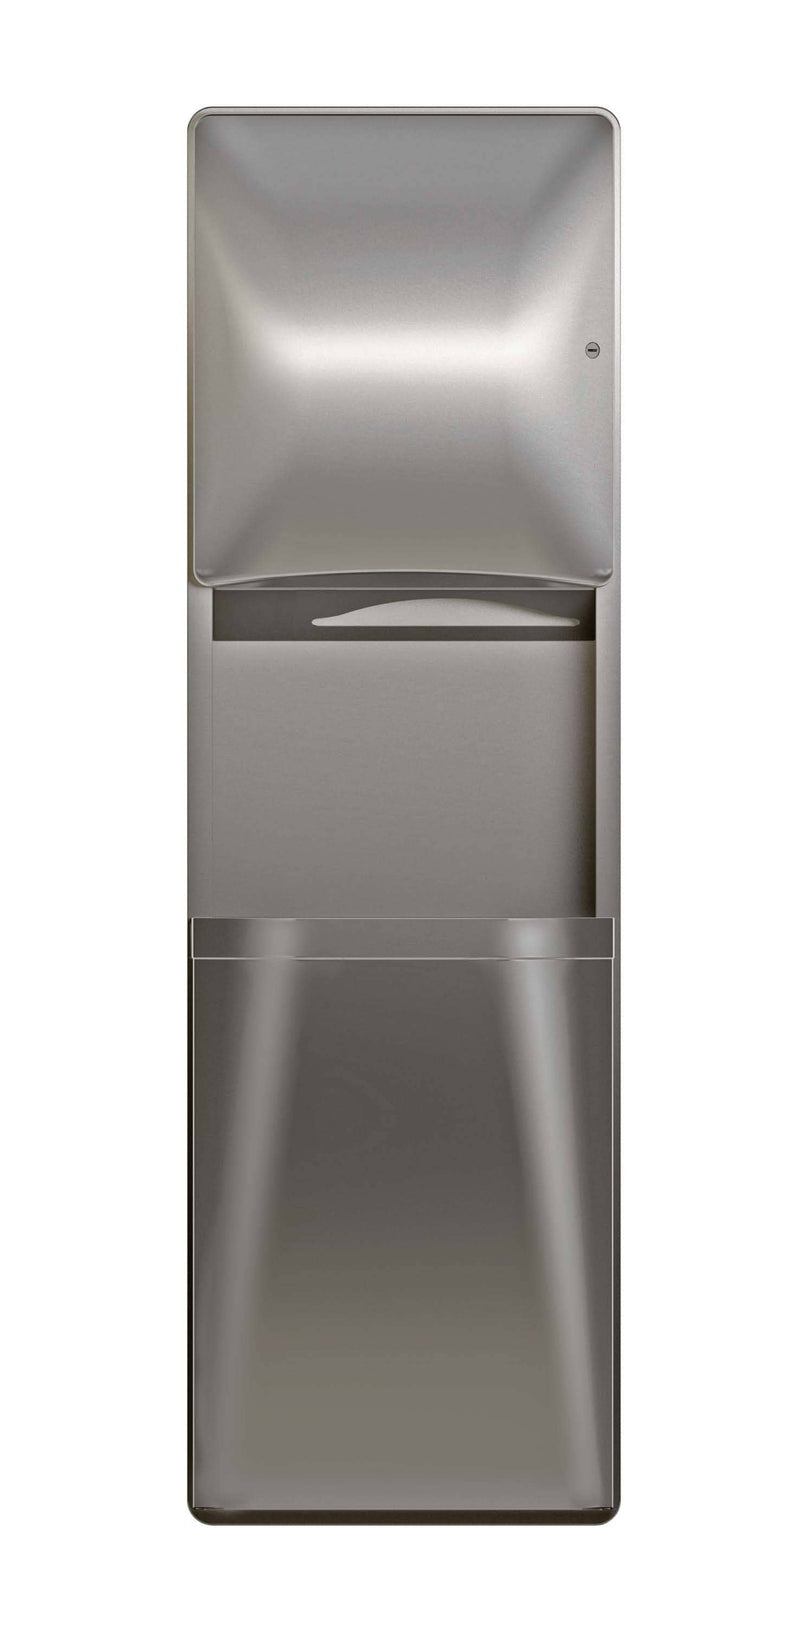 Bradley 2A05-11 Combination Toilet Paper Dispenser/Waste Receptacle, Surface-Mounted, Stainless Steel - TotalRestroom.com